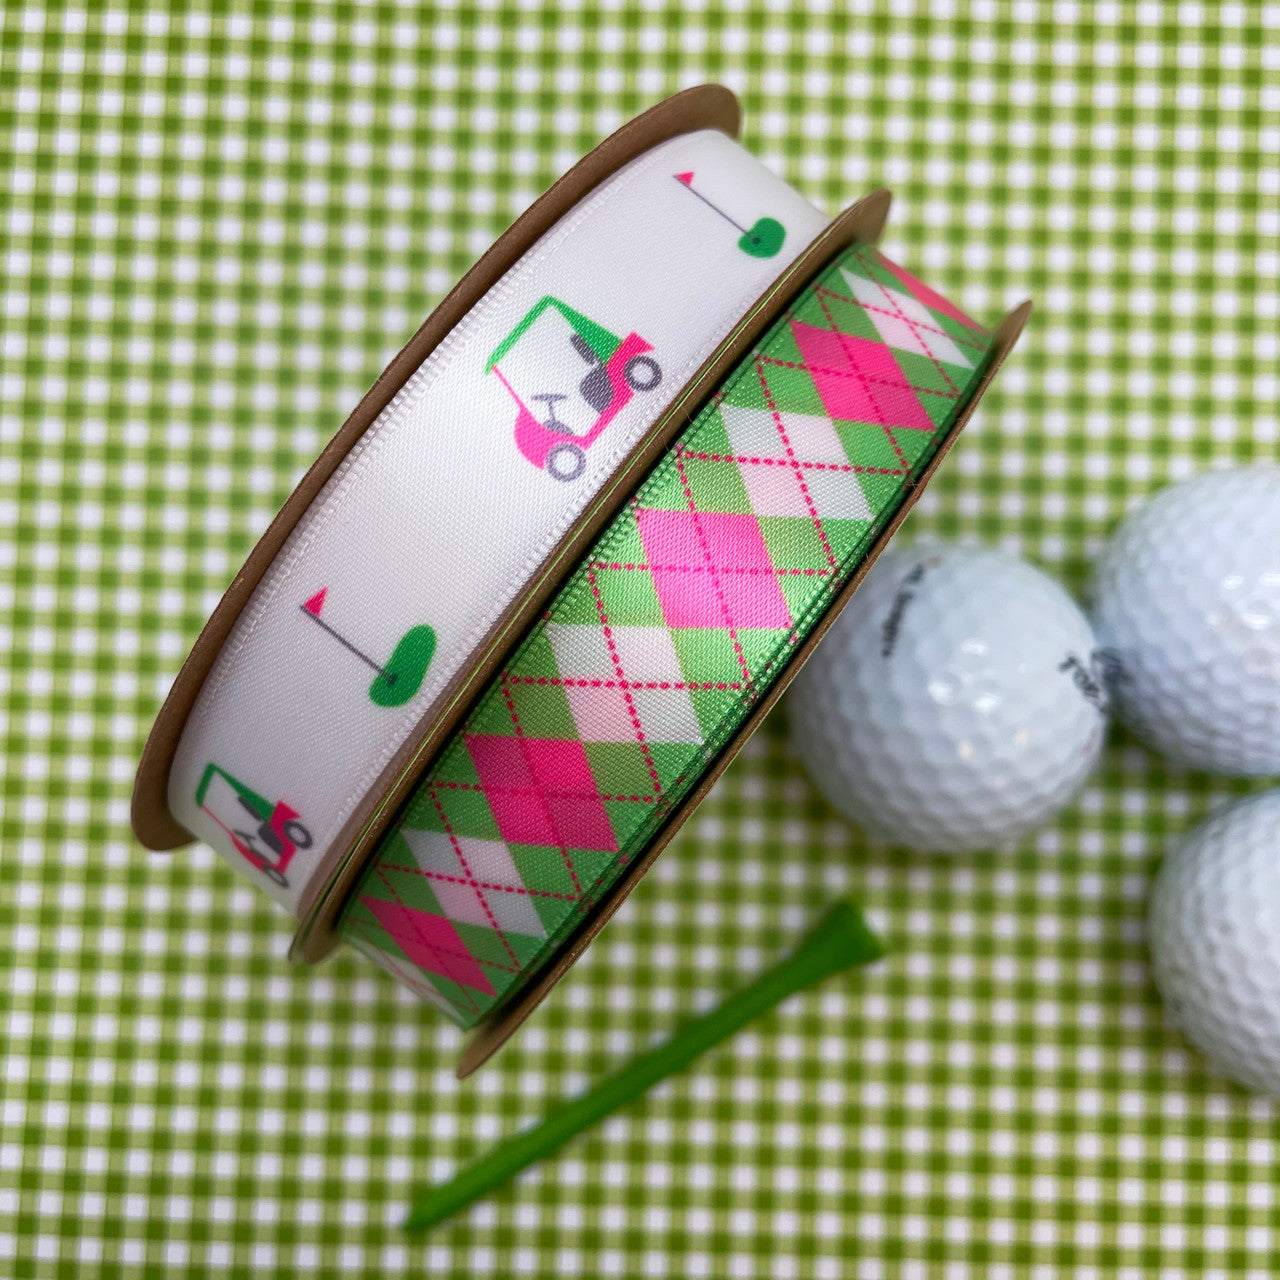 Mix and match our ladies golf carts with pink and green argyle for a beautiful Mother's Day or golf tournament gift!